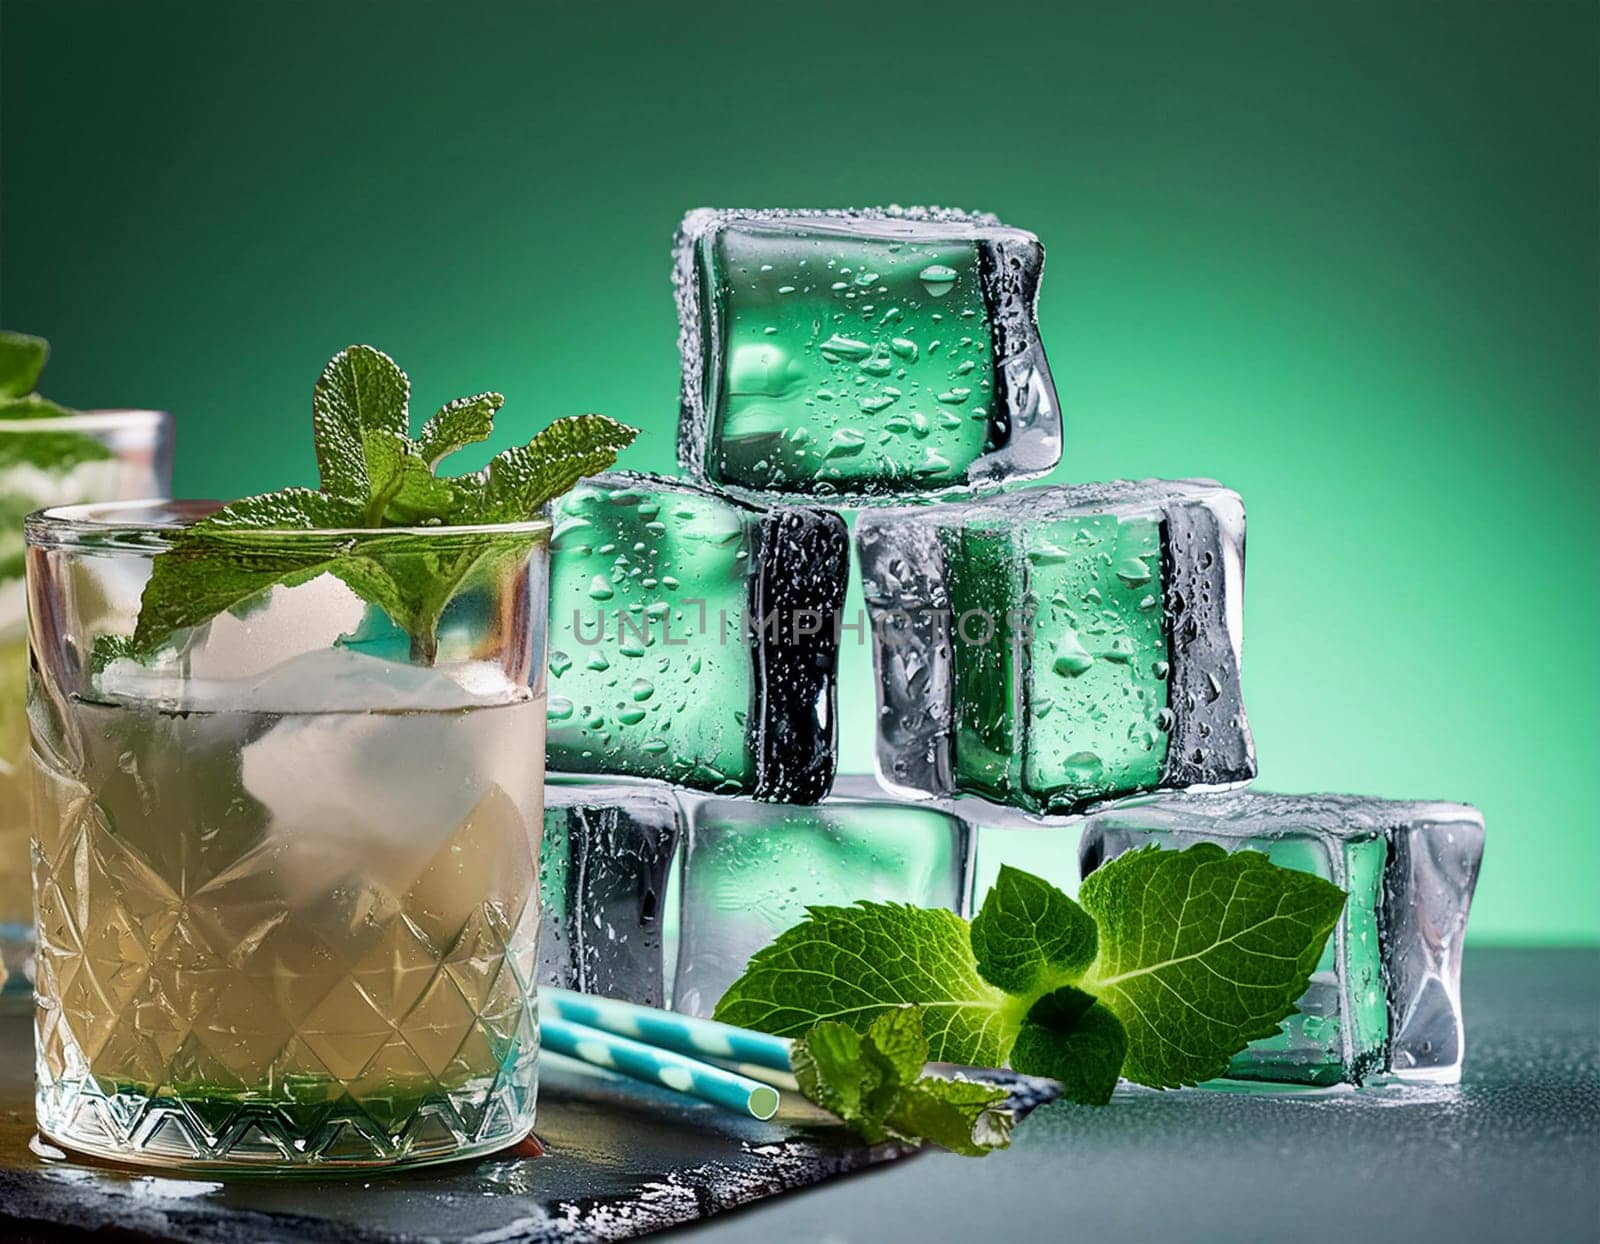 Mojito cocktail with fresh mint, lime, ice cubes and bar shaker by JFsPic